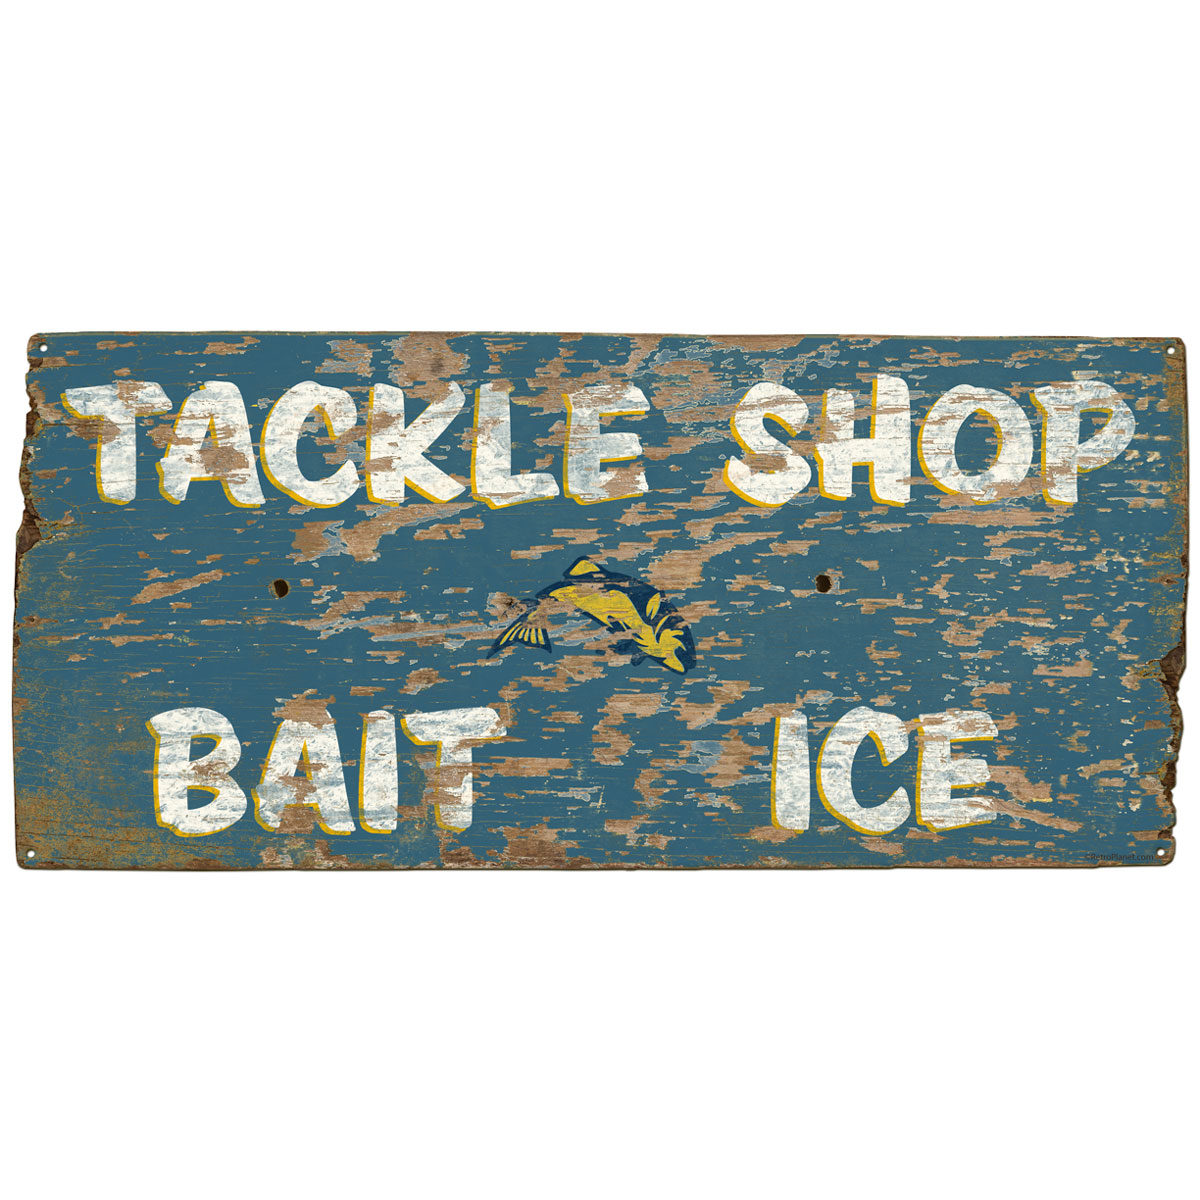 bait sign products for sale